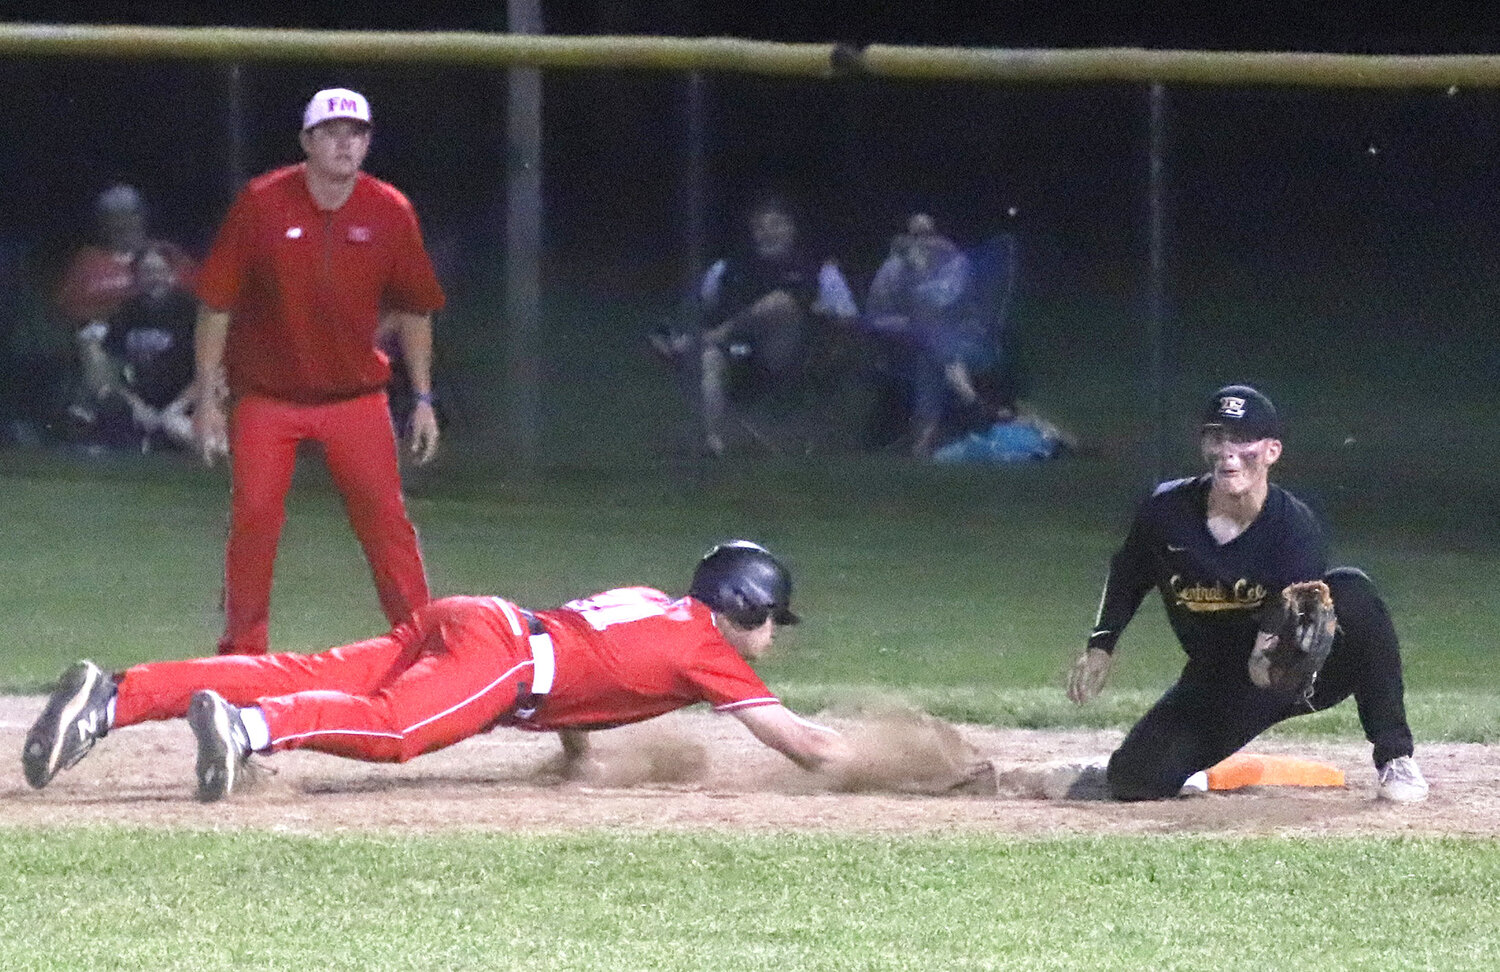 The Bloodhounds' Luke Hellige dives back into 1st base on a pick-off attempt in the bottom of the sixth. The Hounds would score the go ahead run in that half when Central Lee bobbled an infield pop-up.